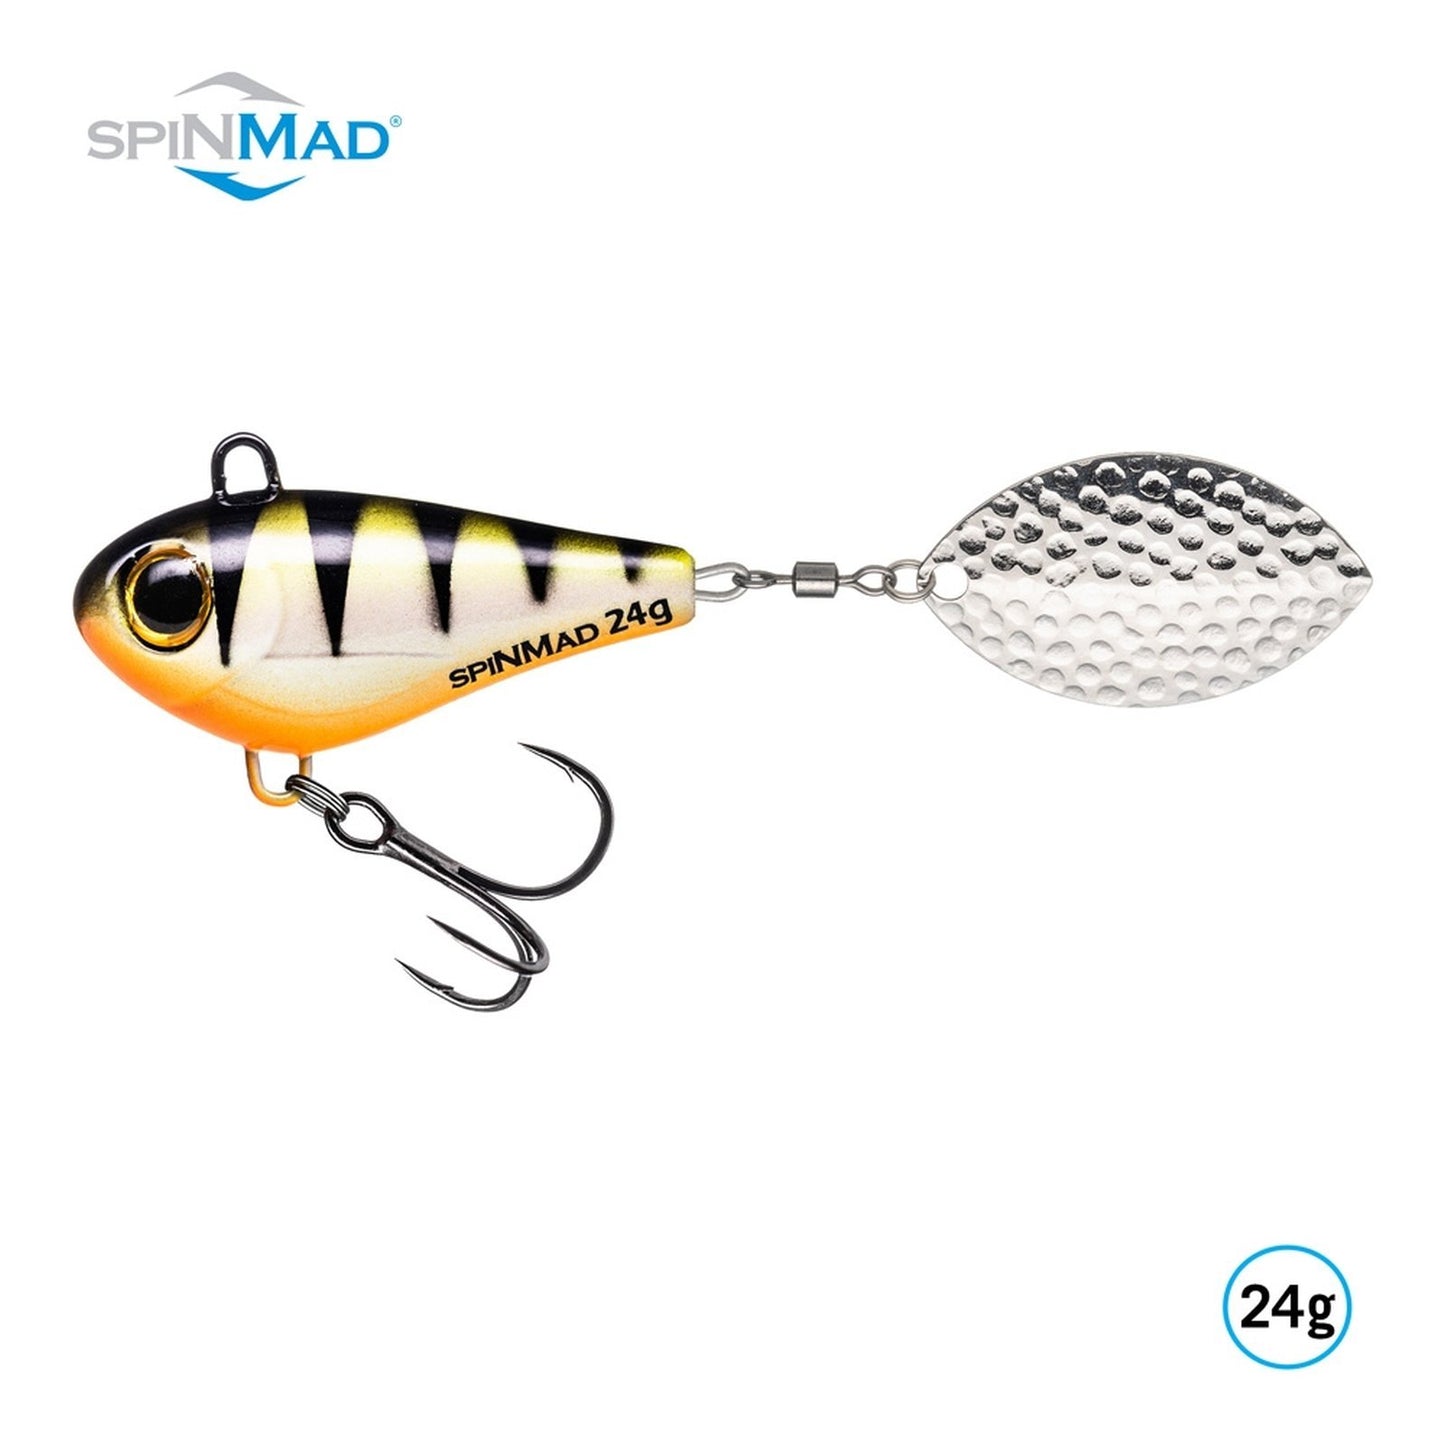 Lieblingskoeder SpinMad Jigmaster Farbe Charly 24 g